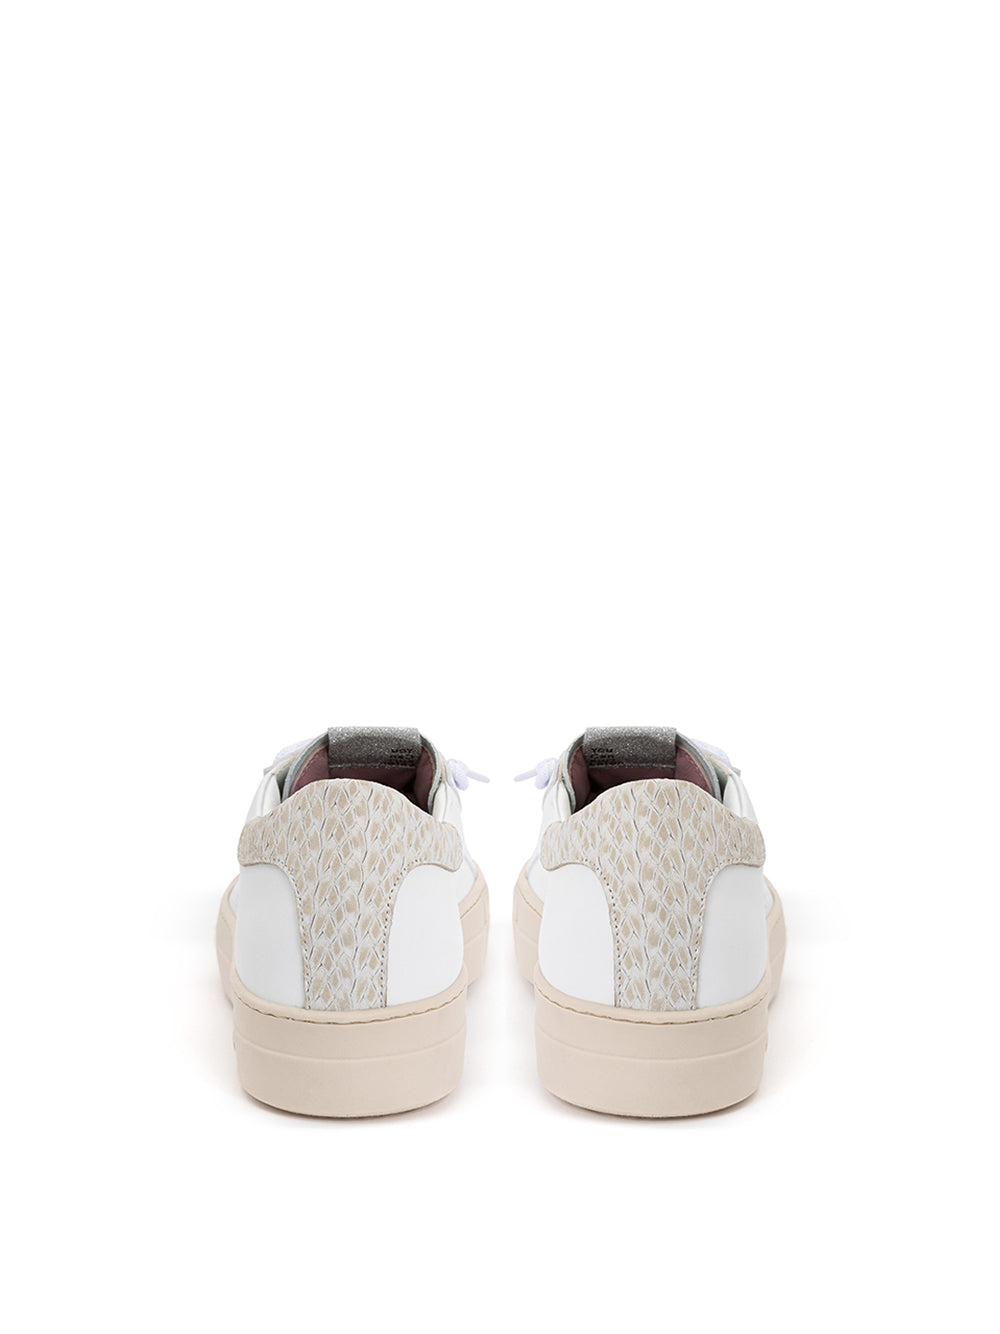 Thea Piton sneakers in white leather P448